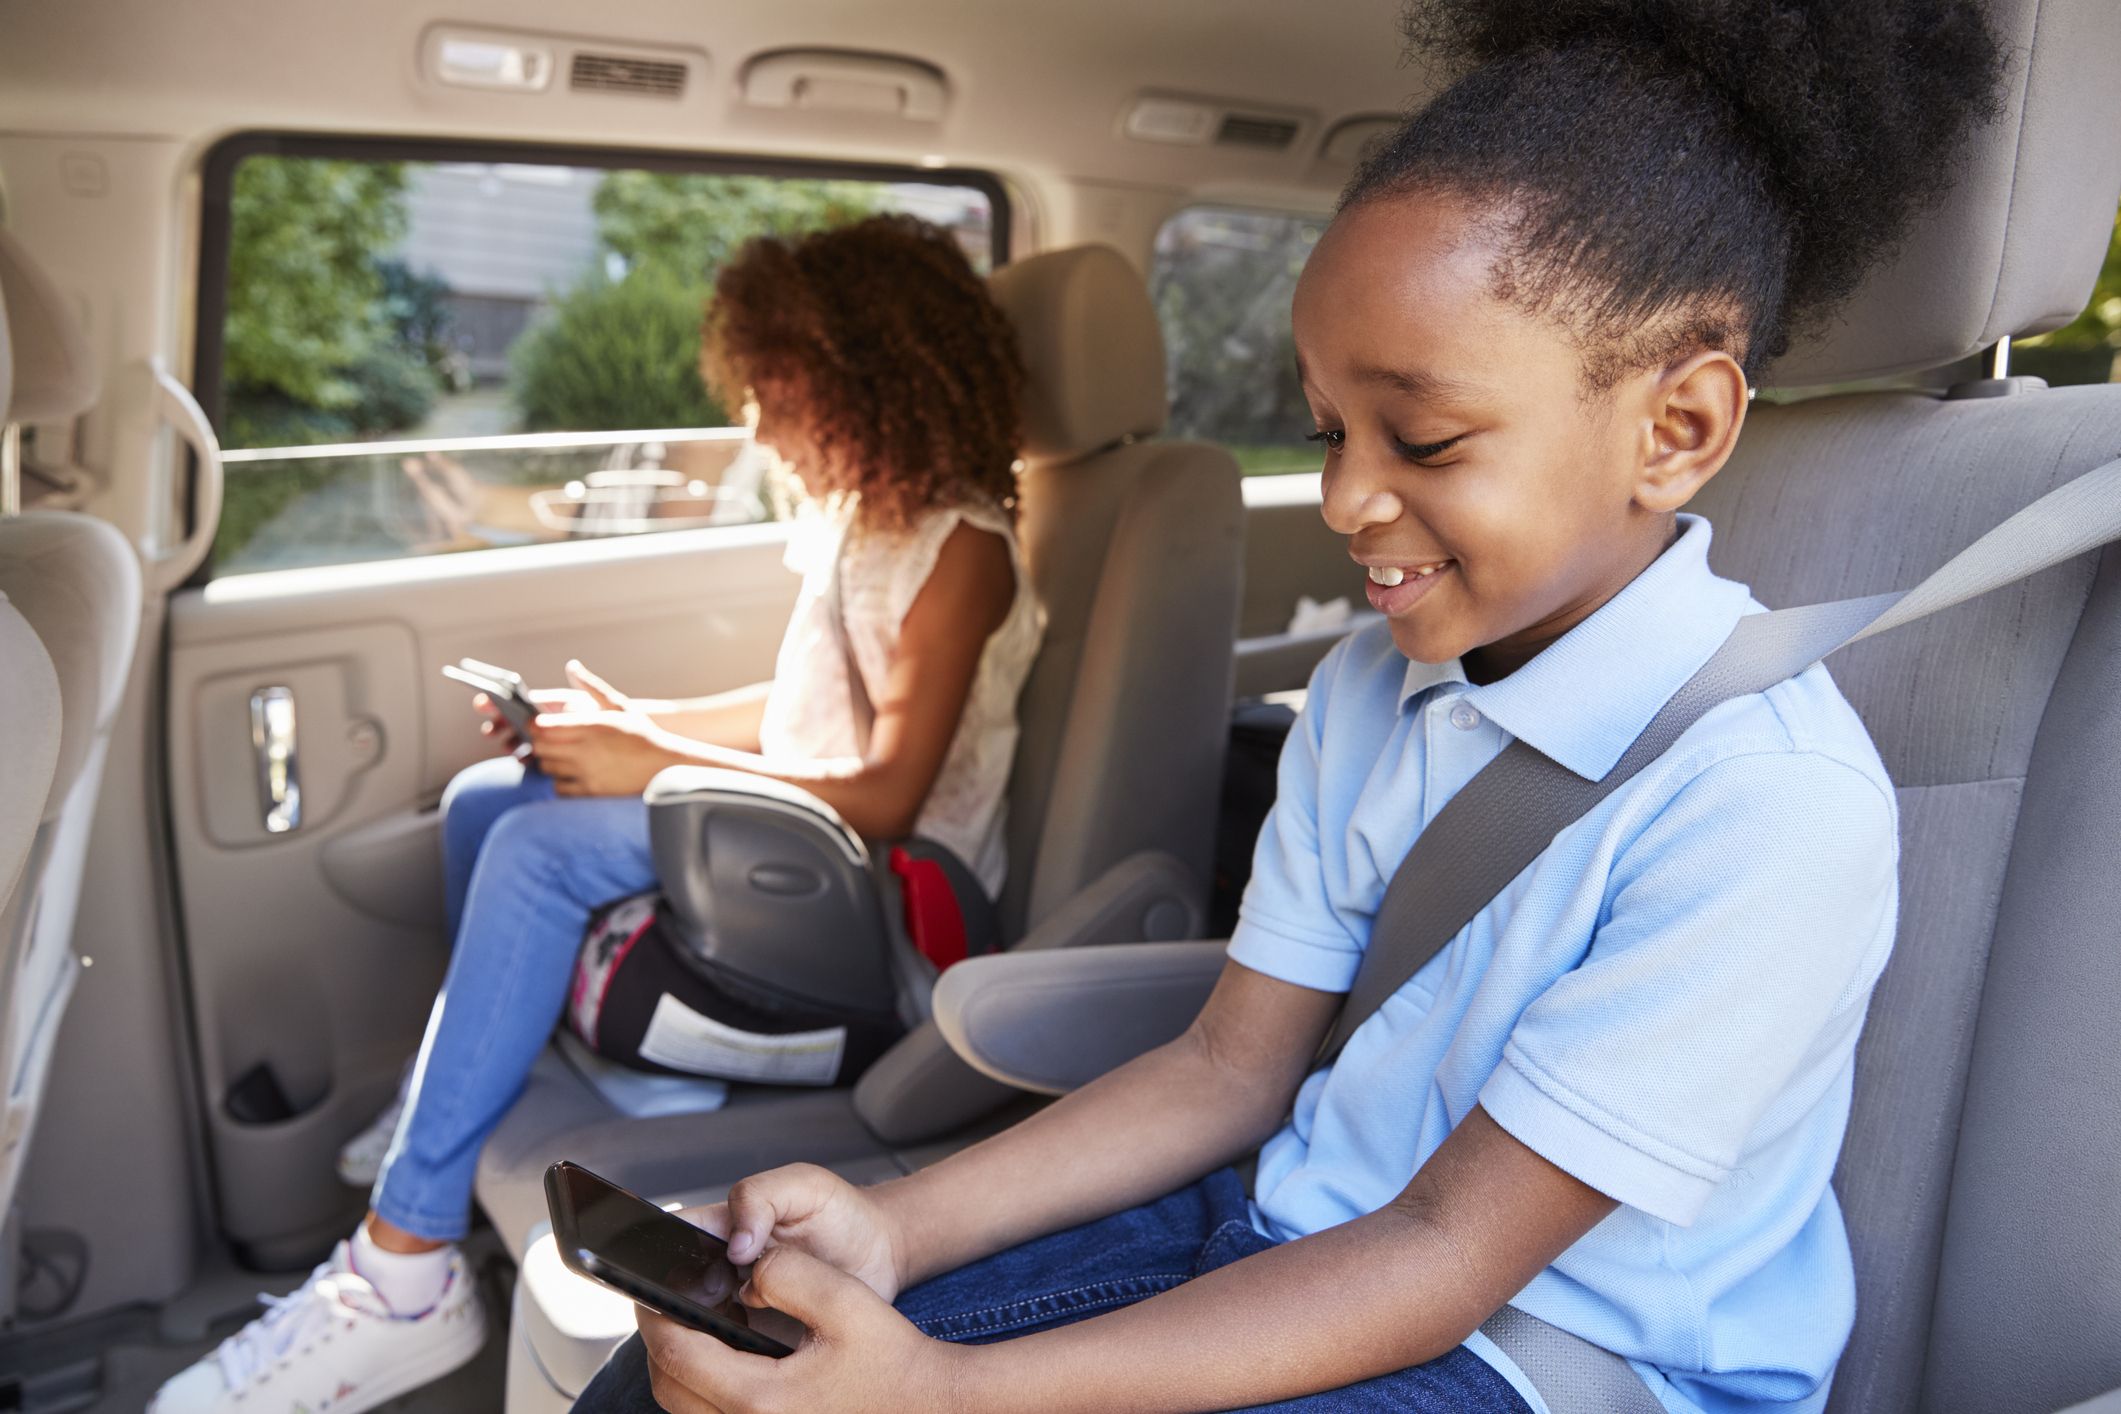 What You Should Know About Florida Car Seats